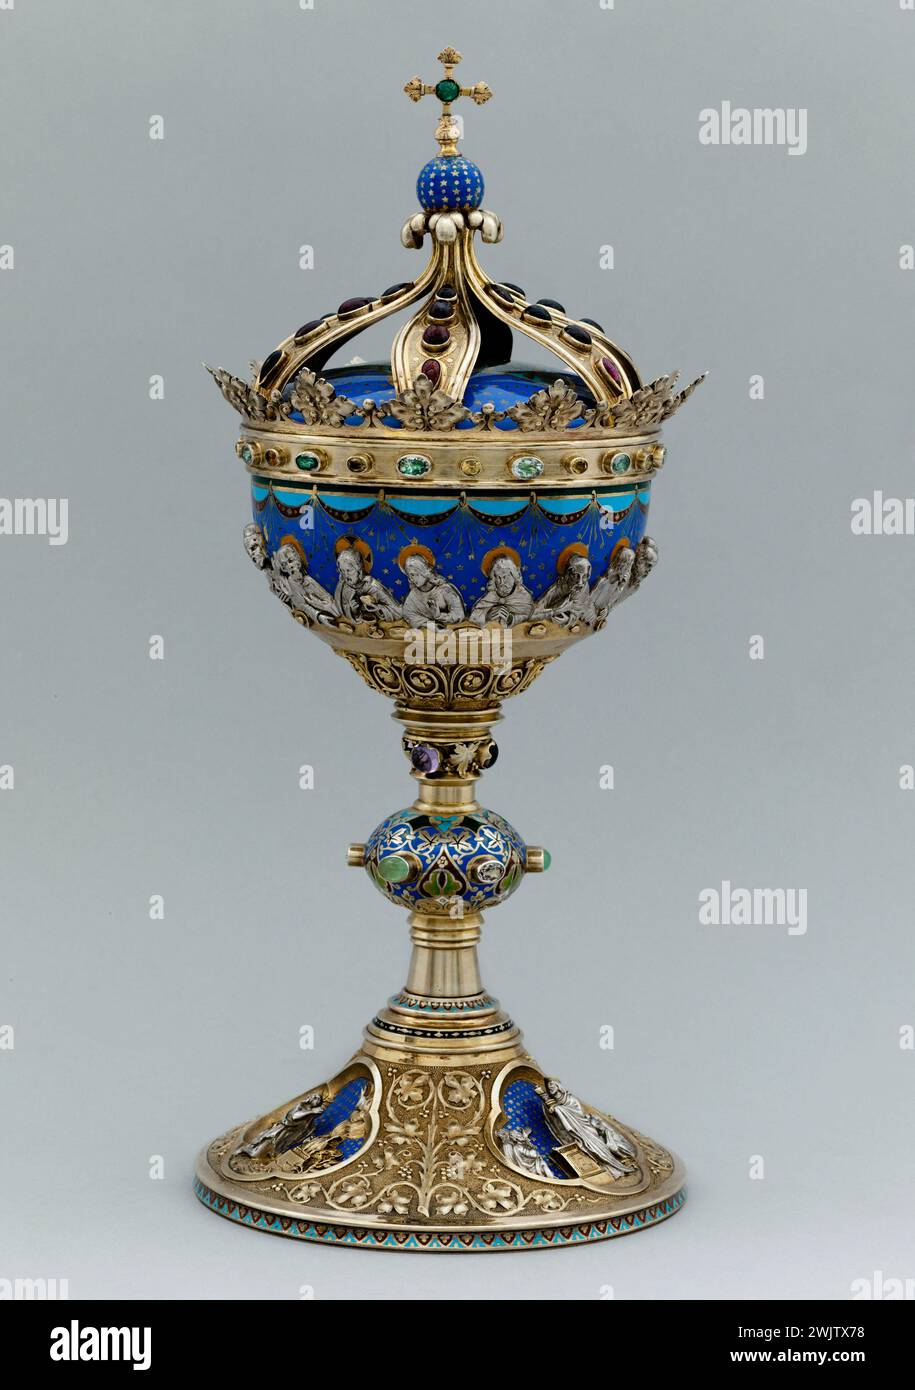 Trioullier et fils (association founded in 1863). 'Ciborian'. Golden silver, pushed and chiseled, enamel, cabochons stones. After 1863. Museum of Fine Arts of the City of Paris, Petit Palais. 71340-3 Apoter, silver dore, silver pushing chisel, cabochon, cene, chretian, ciboria, crown, cross, last meal, email, eucharist, religious object, goldsmith, precious stone, Catholic religion, religious scene, 19th century Stock Photo